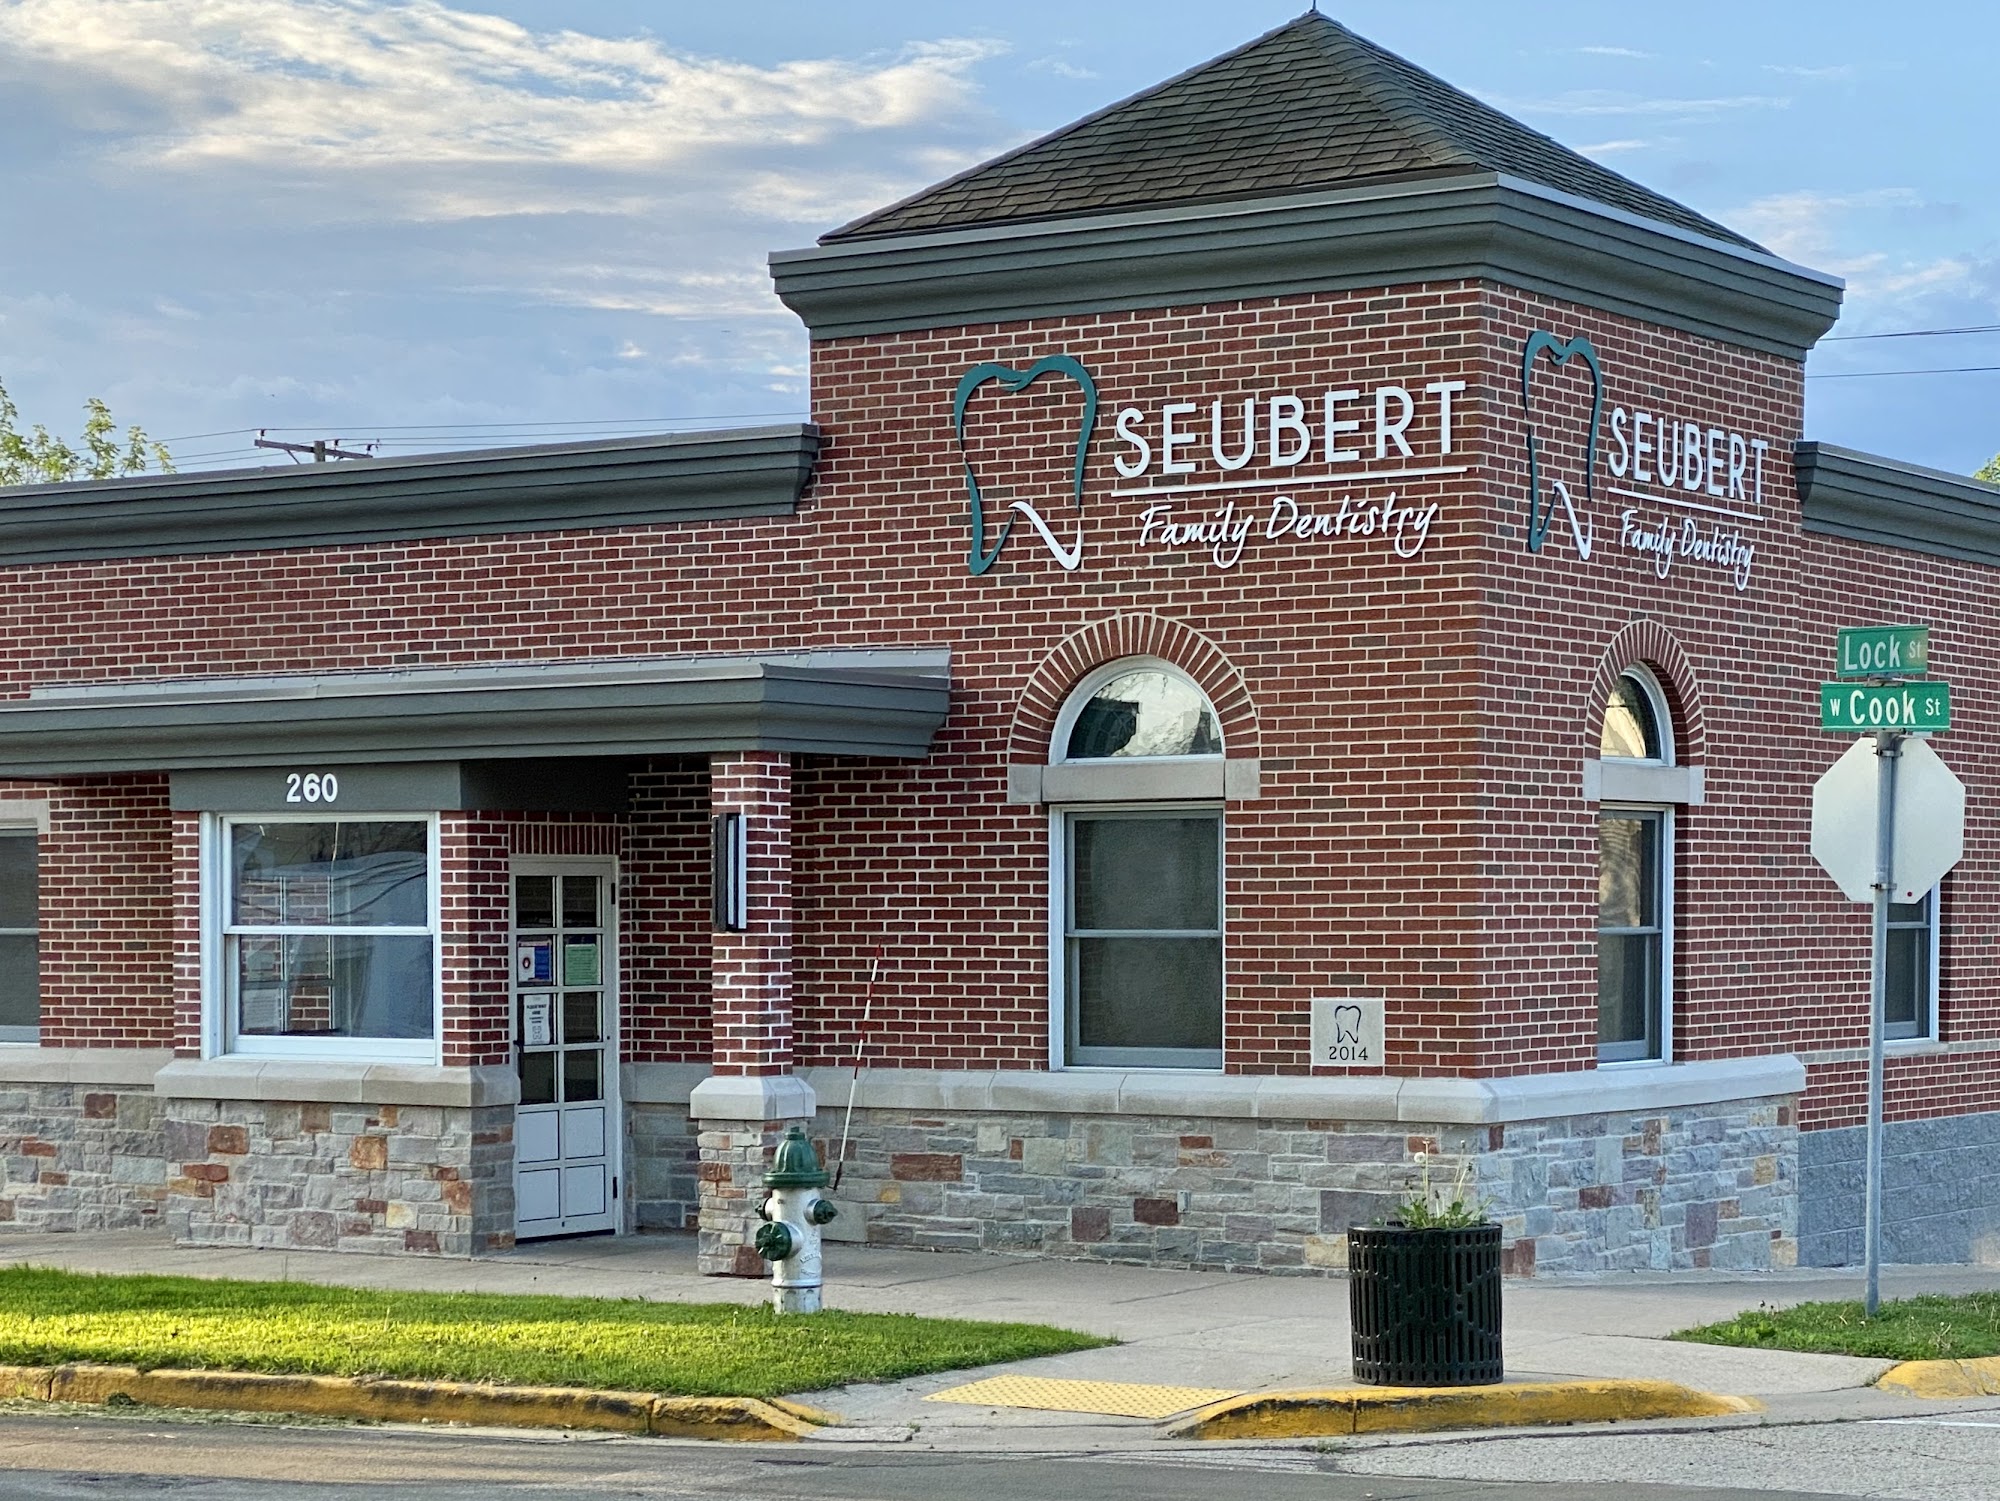 Seubert Family Dentistry 260 W Cook St, Portage Wisconsin 53901